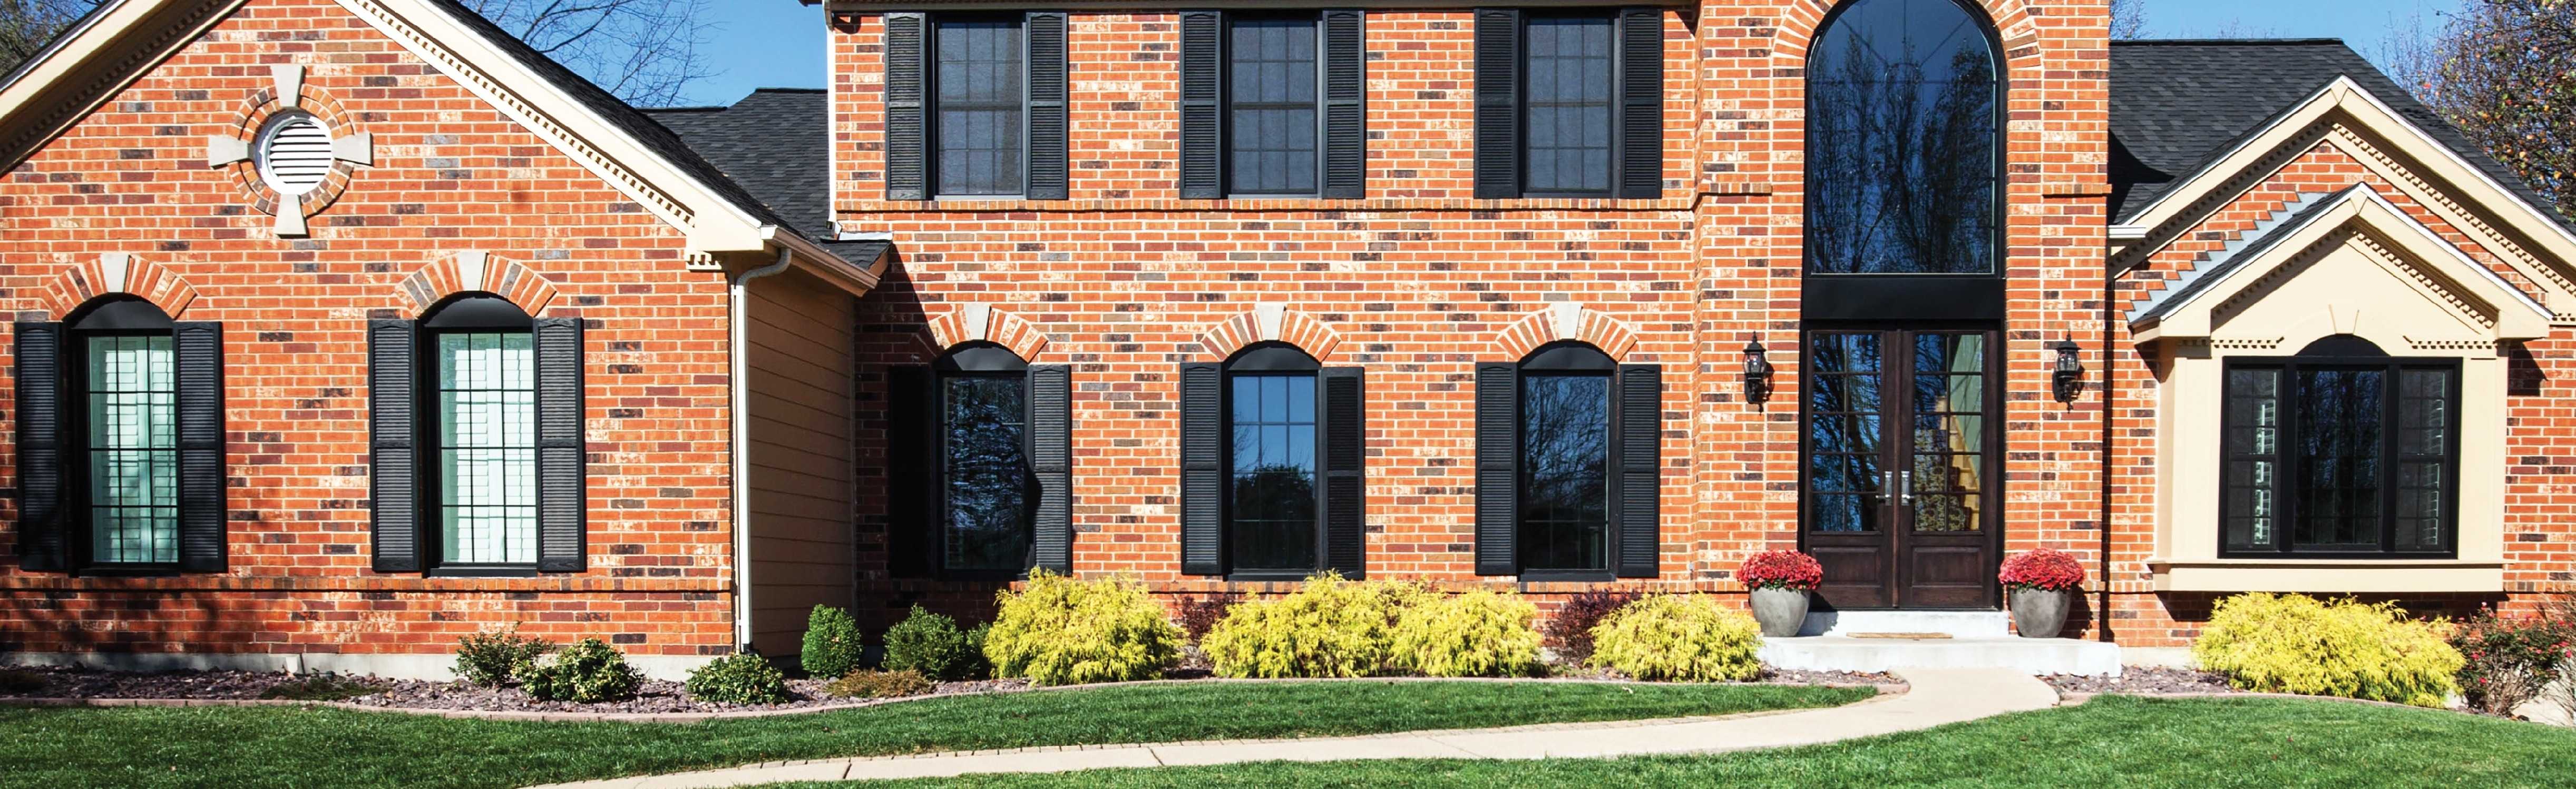 Exterior view of Marvin Replacement black Single Hung windows on a brick house with black shutters.